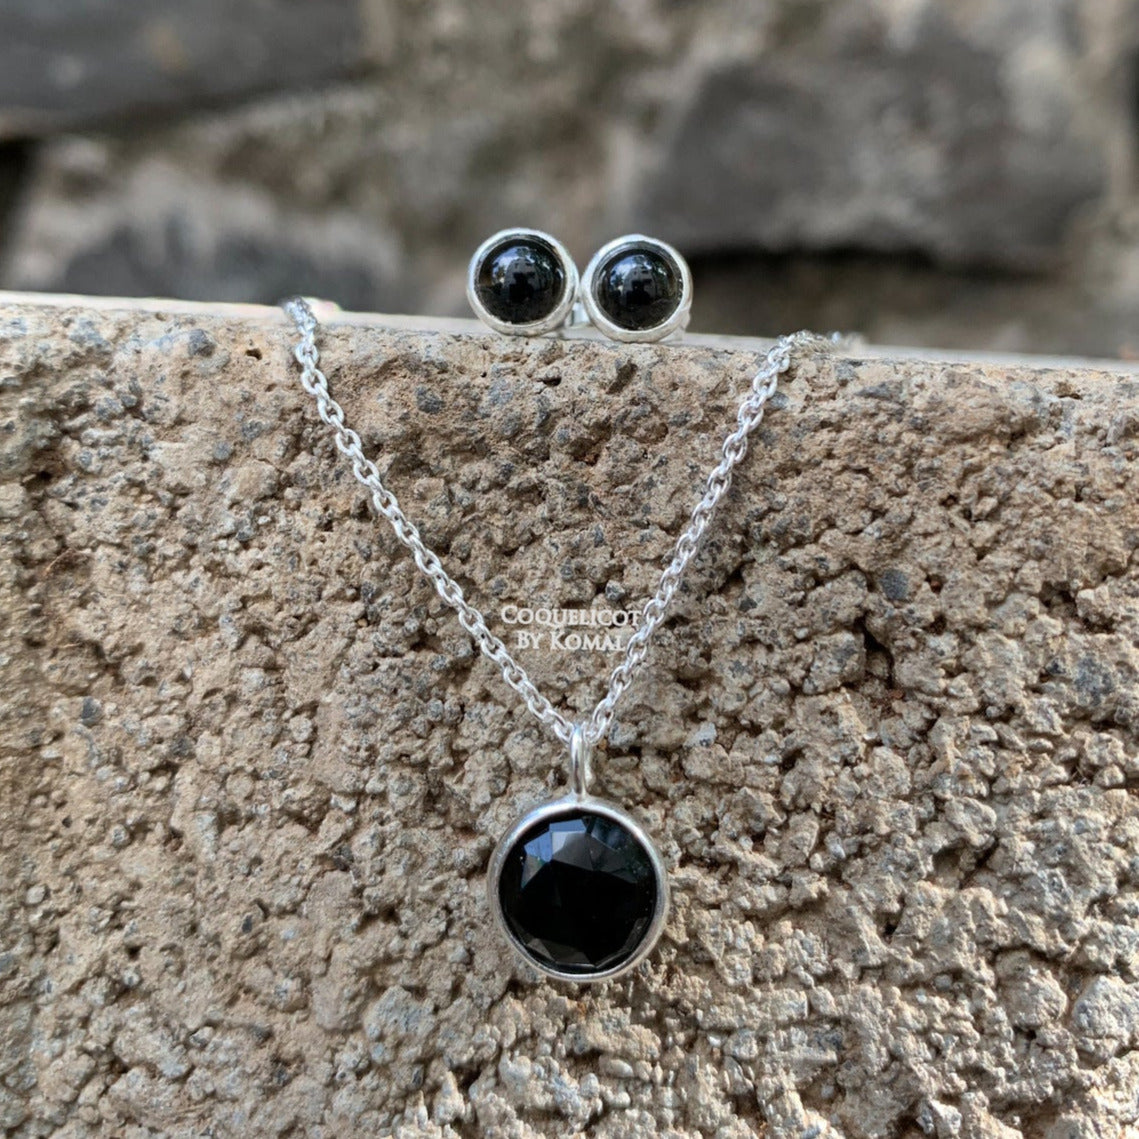 Black Obsidian Necklace and Earrings Set with 10mm round cut pendant, chain and 6mm studded earrings. This dainty women's jewellery is a perfect spiritual and unique gift.